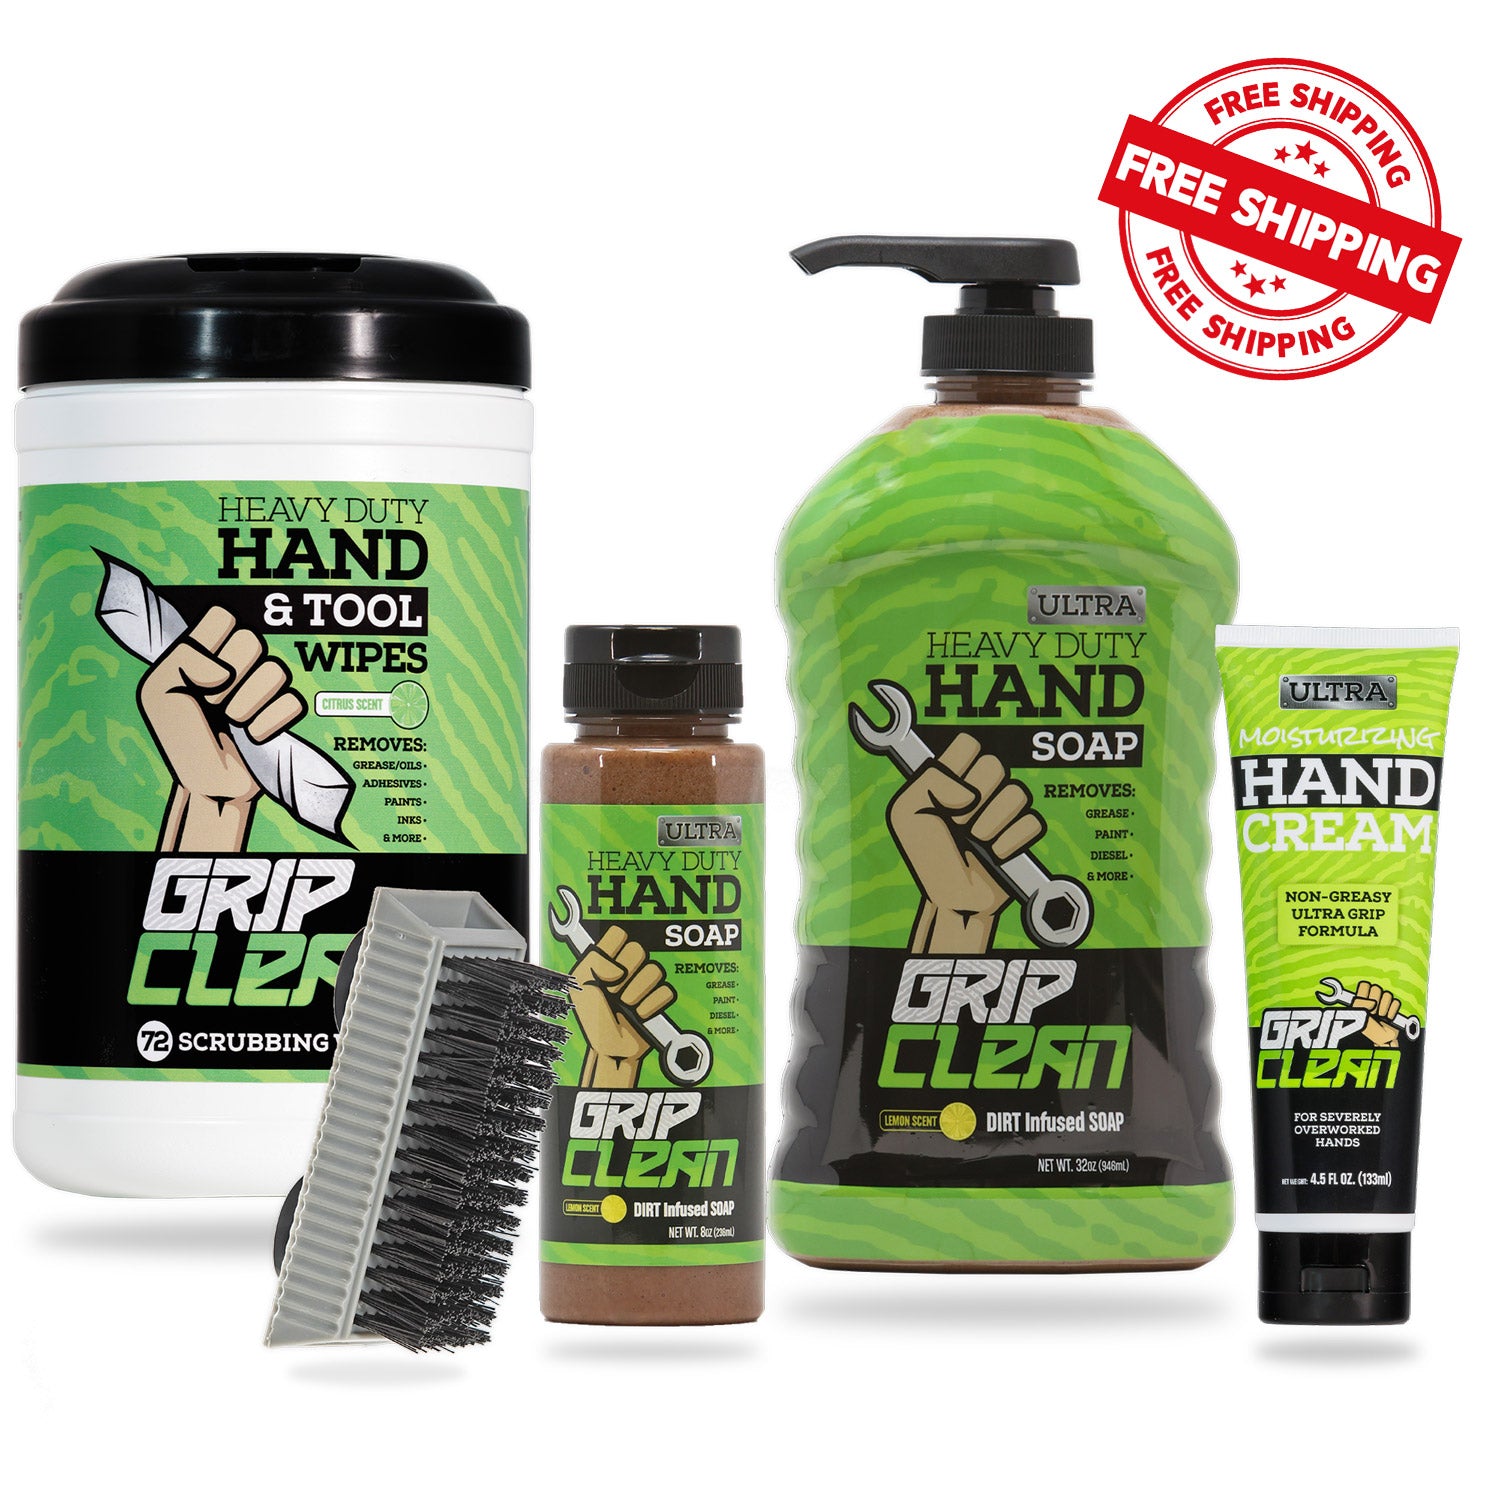  Grip Clean Heavy Duty Cleaning Wipes, Hands, Tool